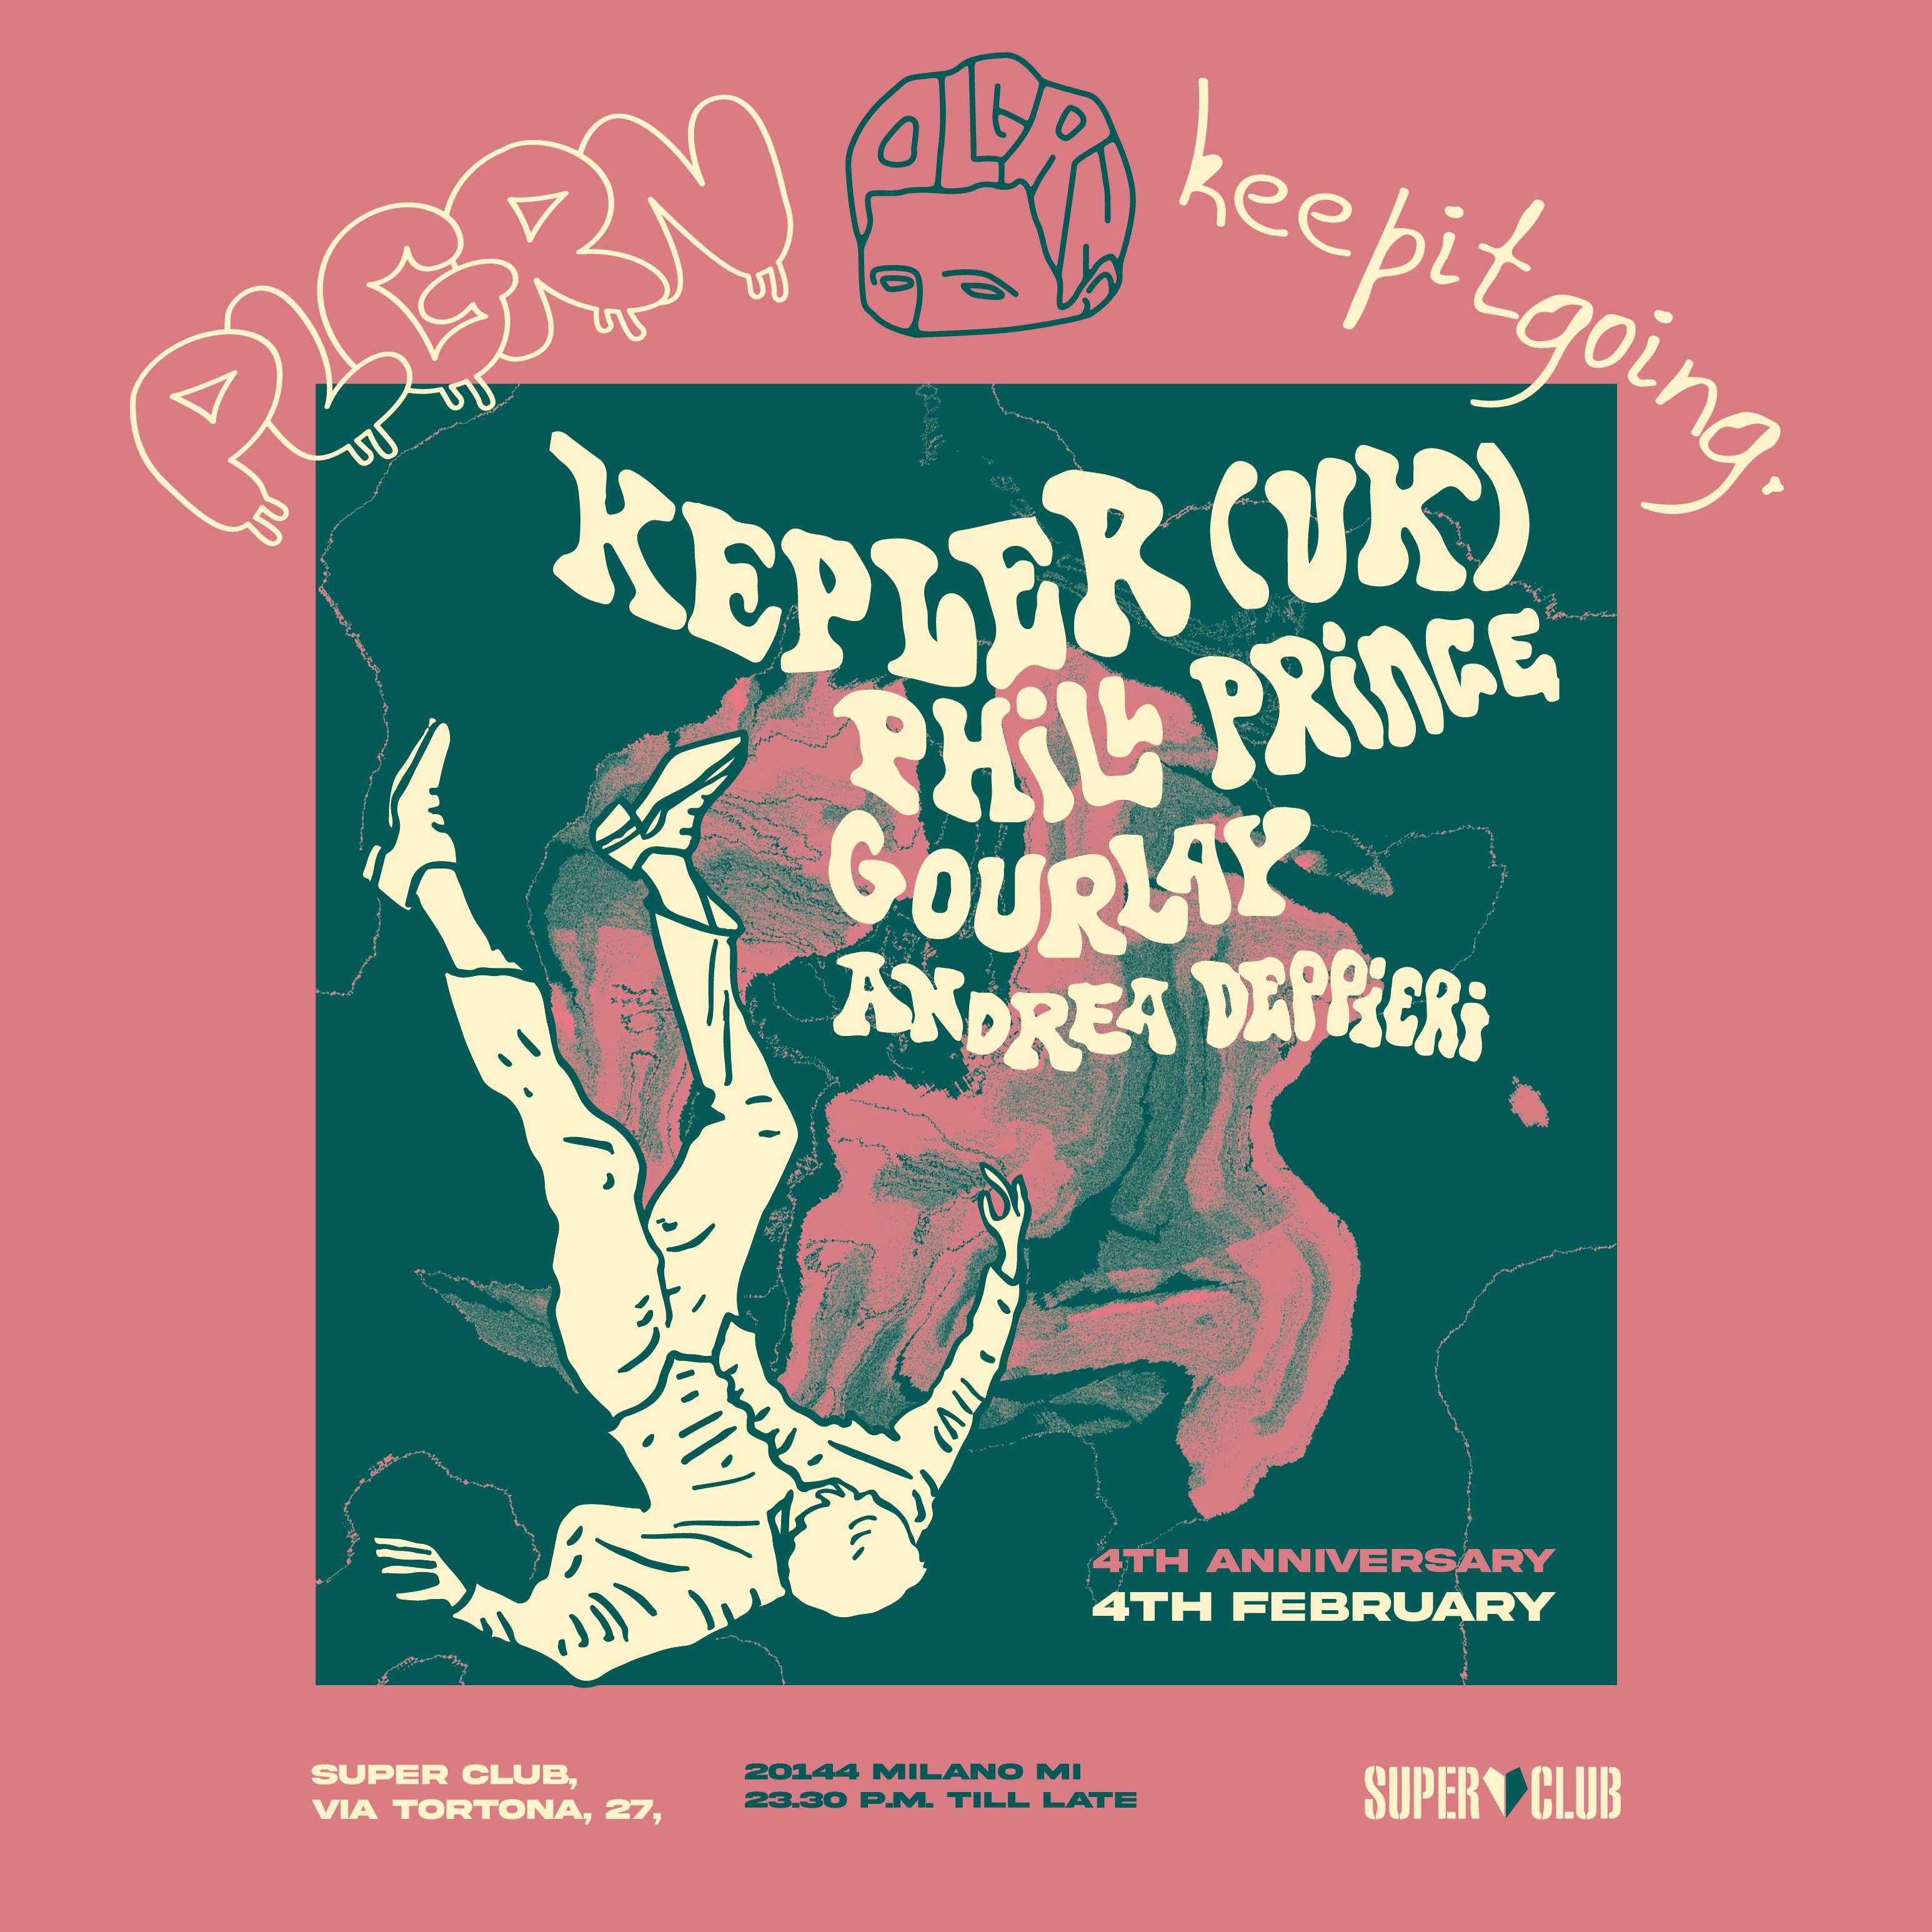 Plgrn x Keep It Going with Kepler [ Perspective - One records ] - フライヤー表